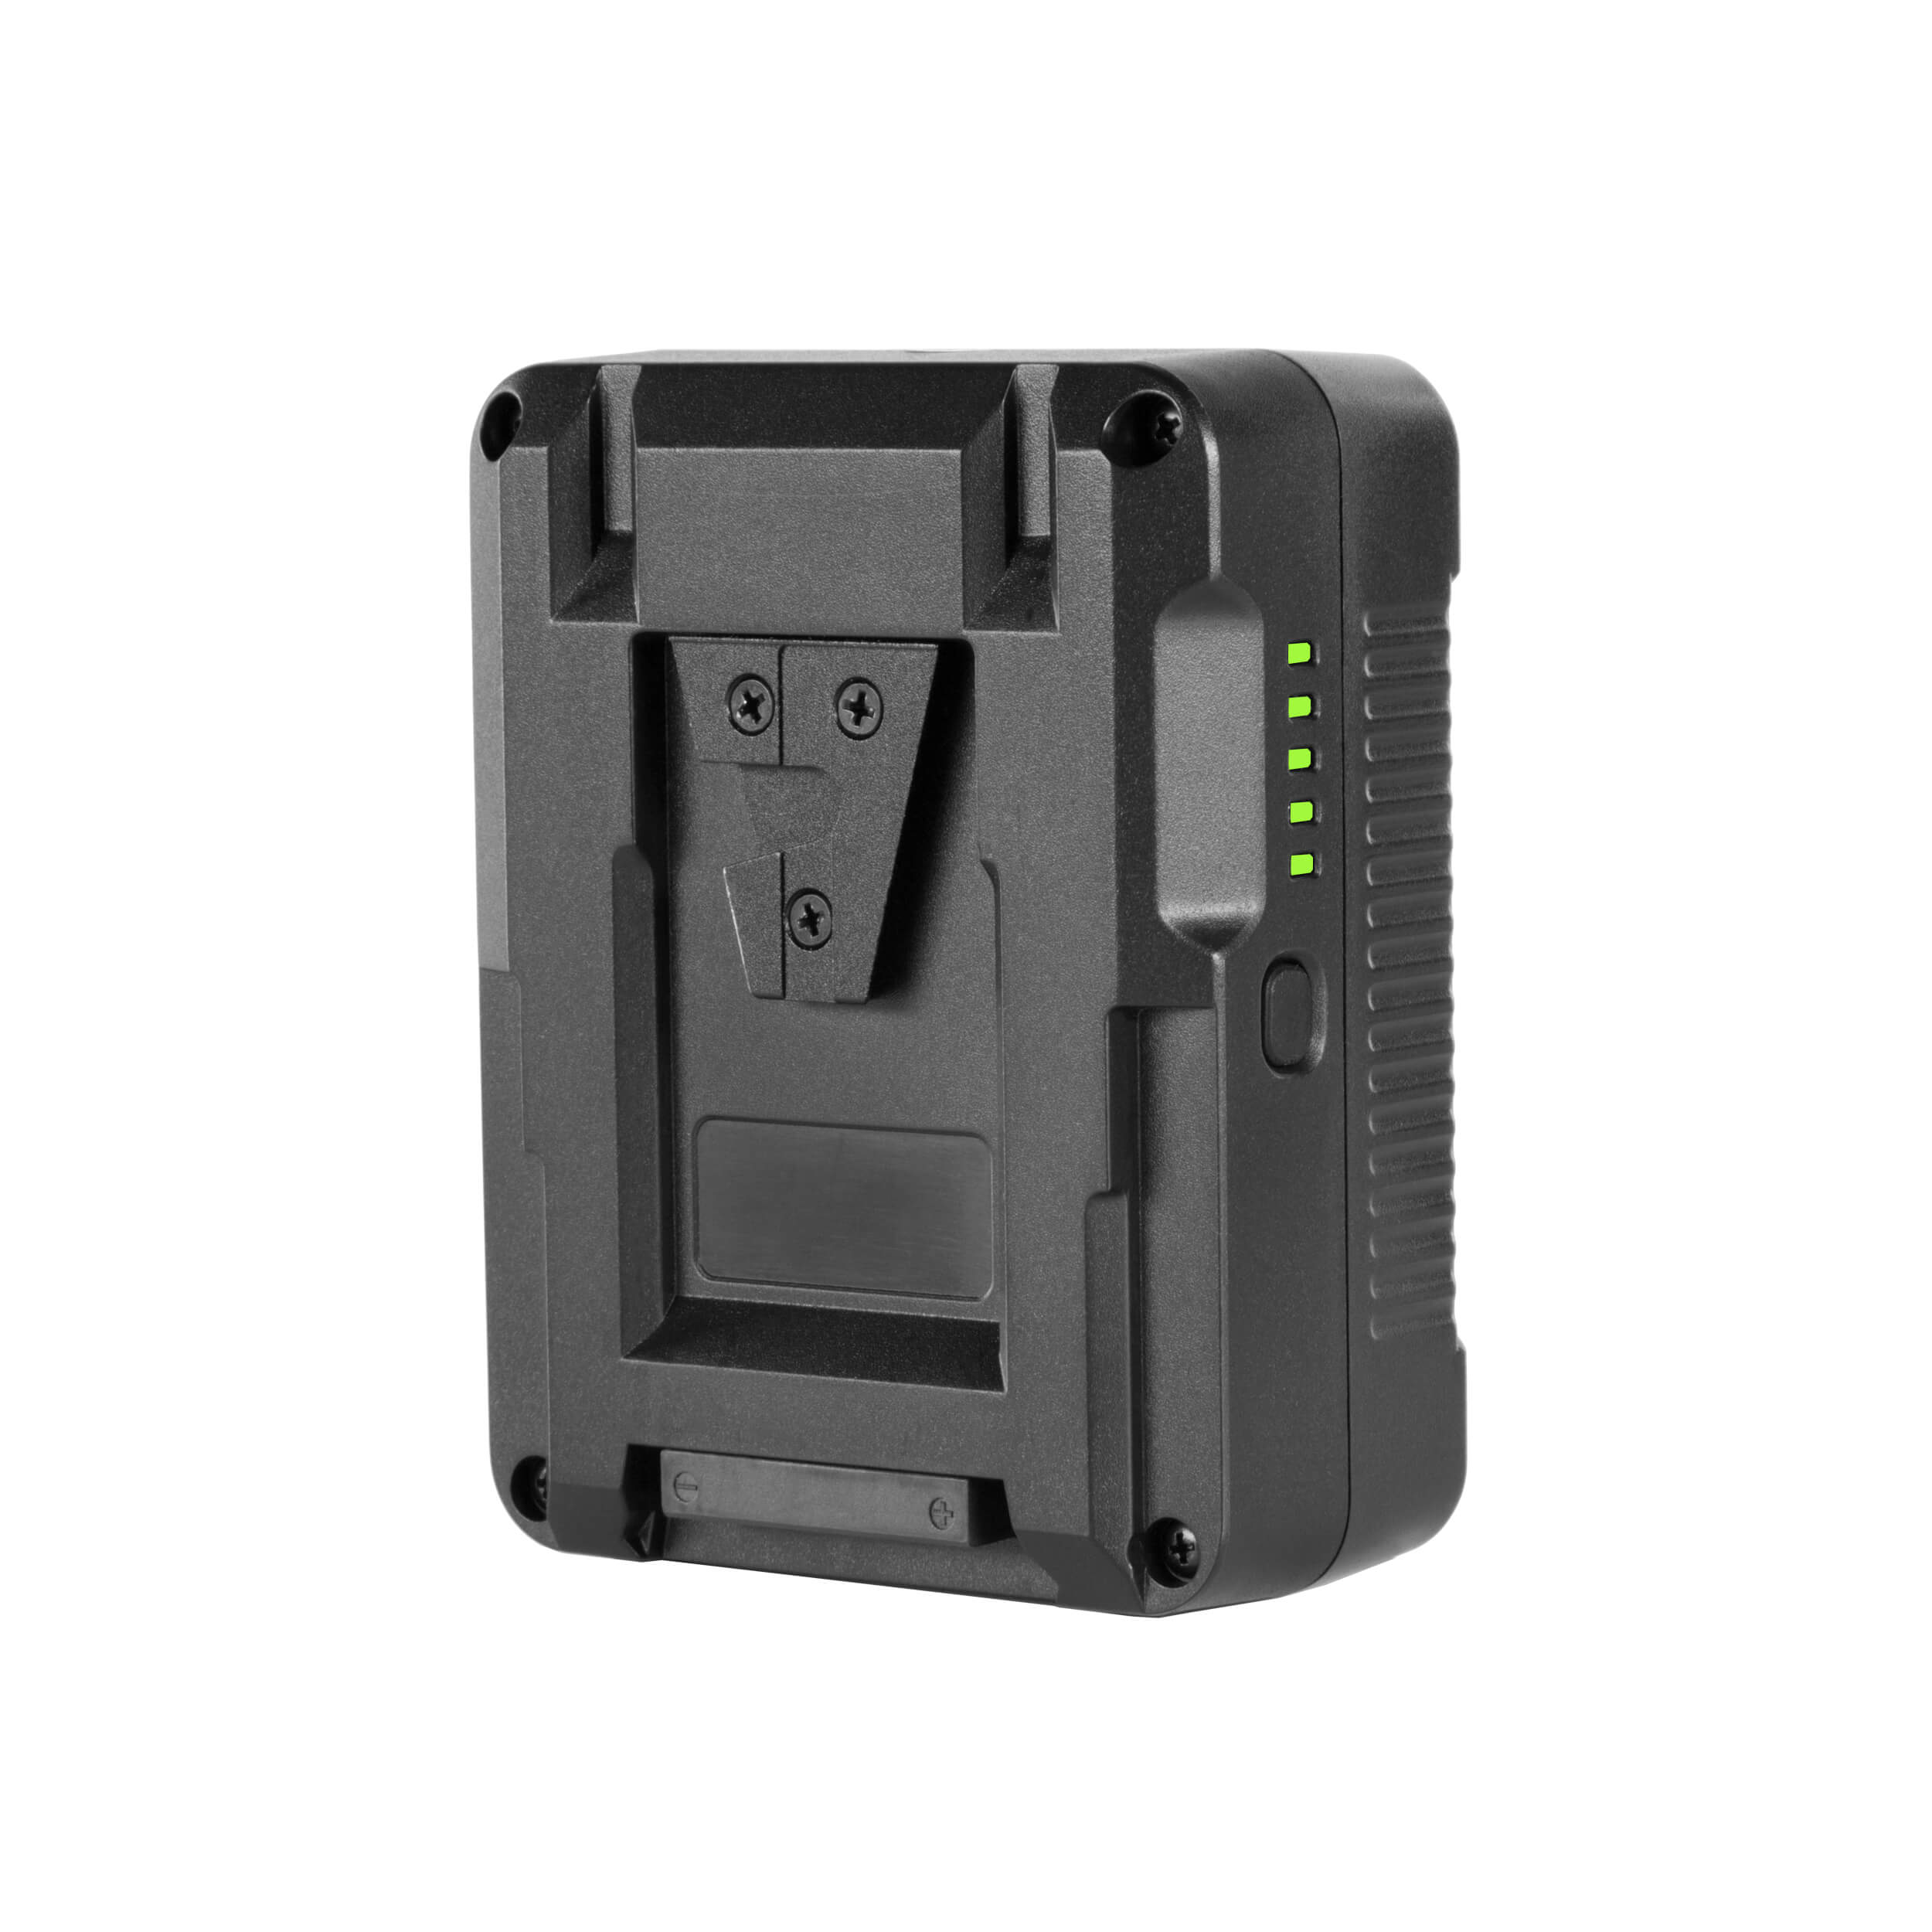 SHAPE Full Play 2 Battery Kit with 2-Bay Vertical Charger (V-Mount)